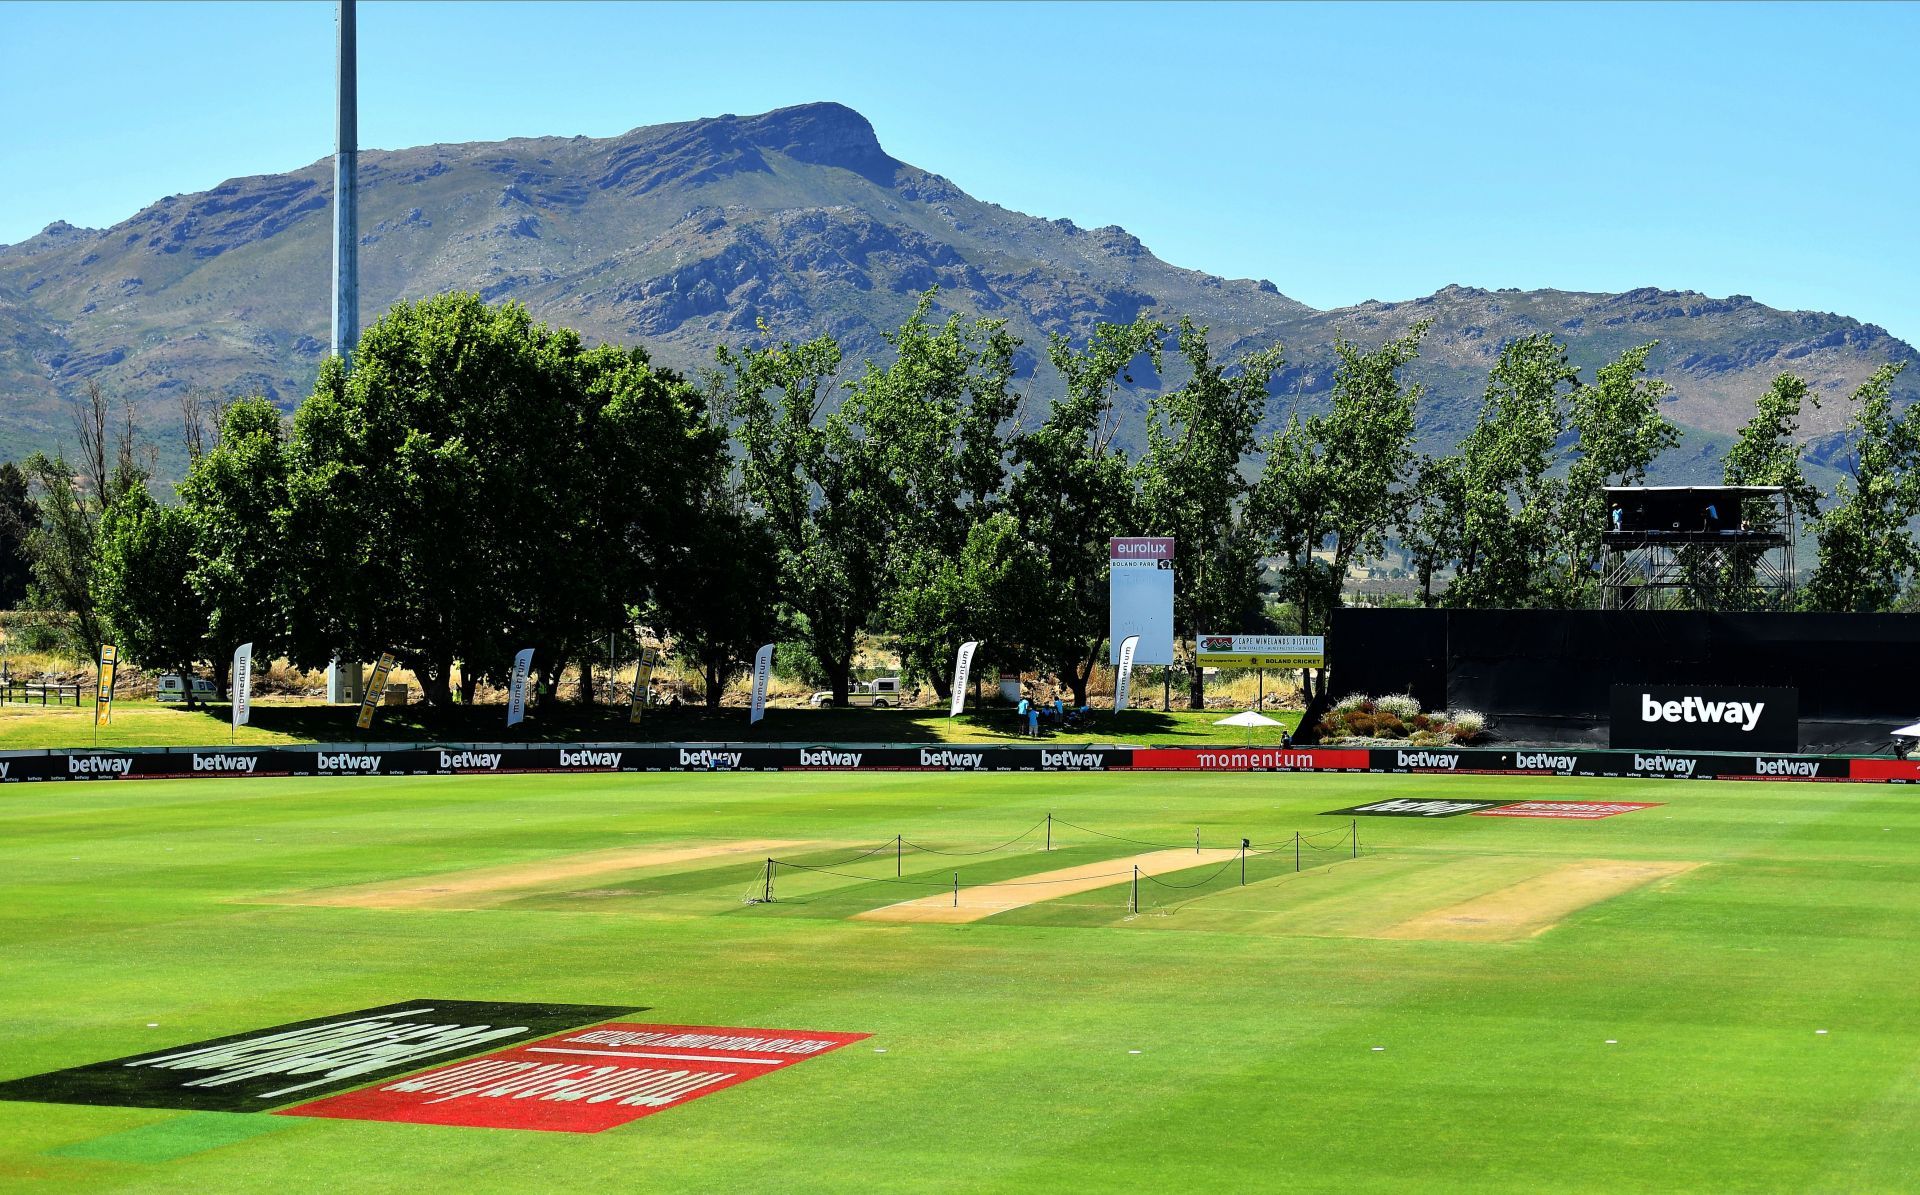 Boland Park will host the first two matches of the ICC Cricket World Cup Super League series between India and South Africa